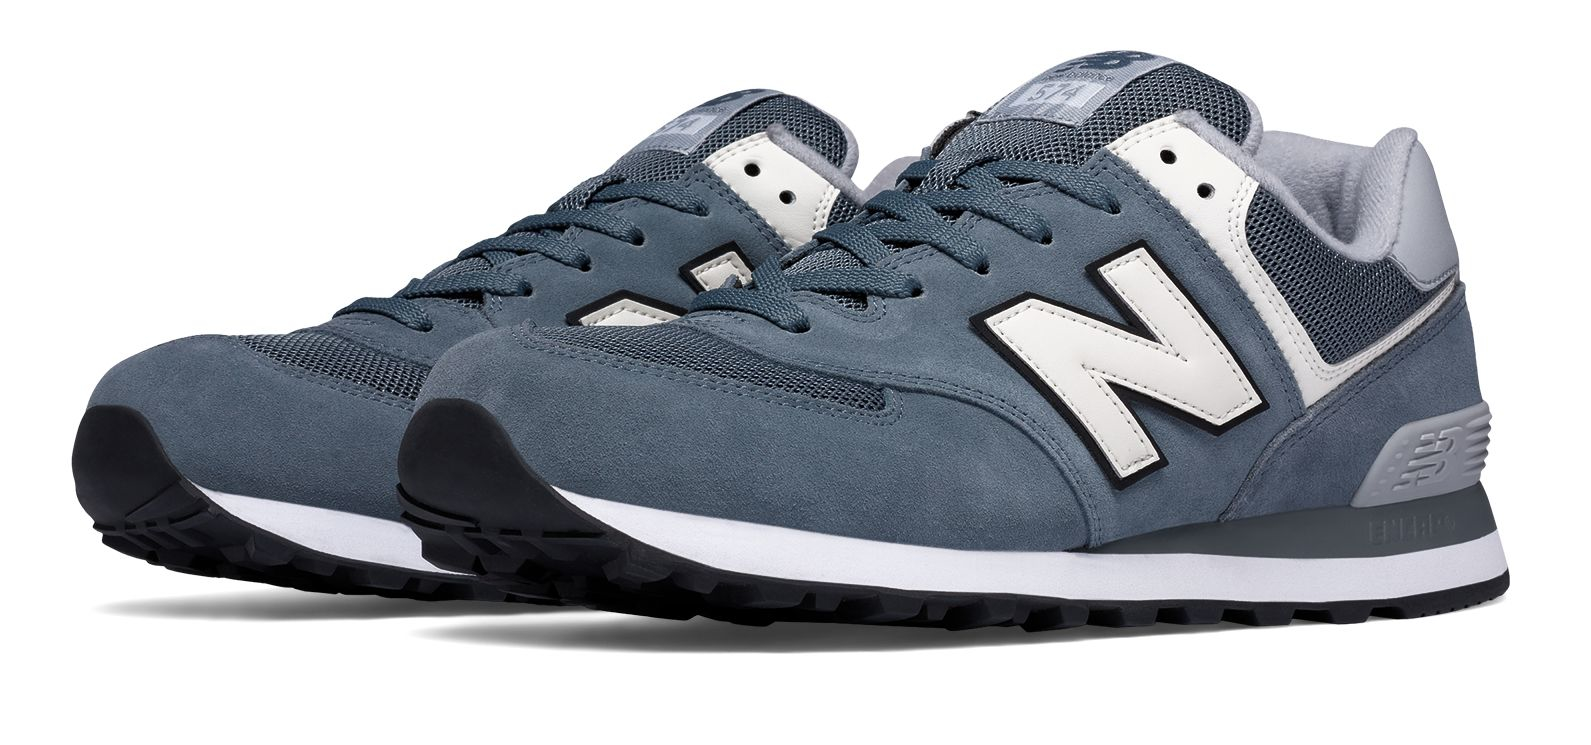 Lyst - New Balance 565 Sneakers in Blue for Men